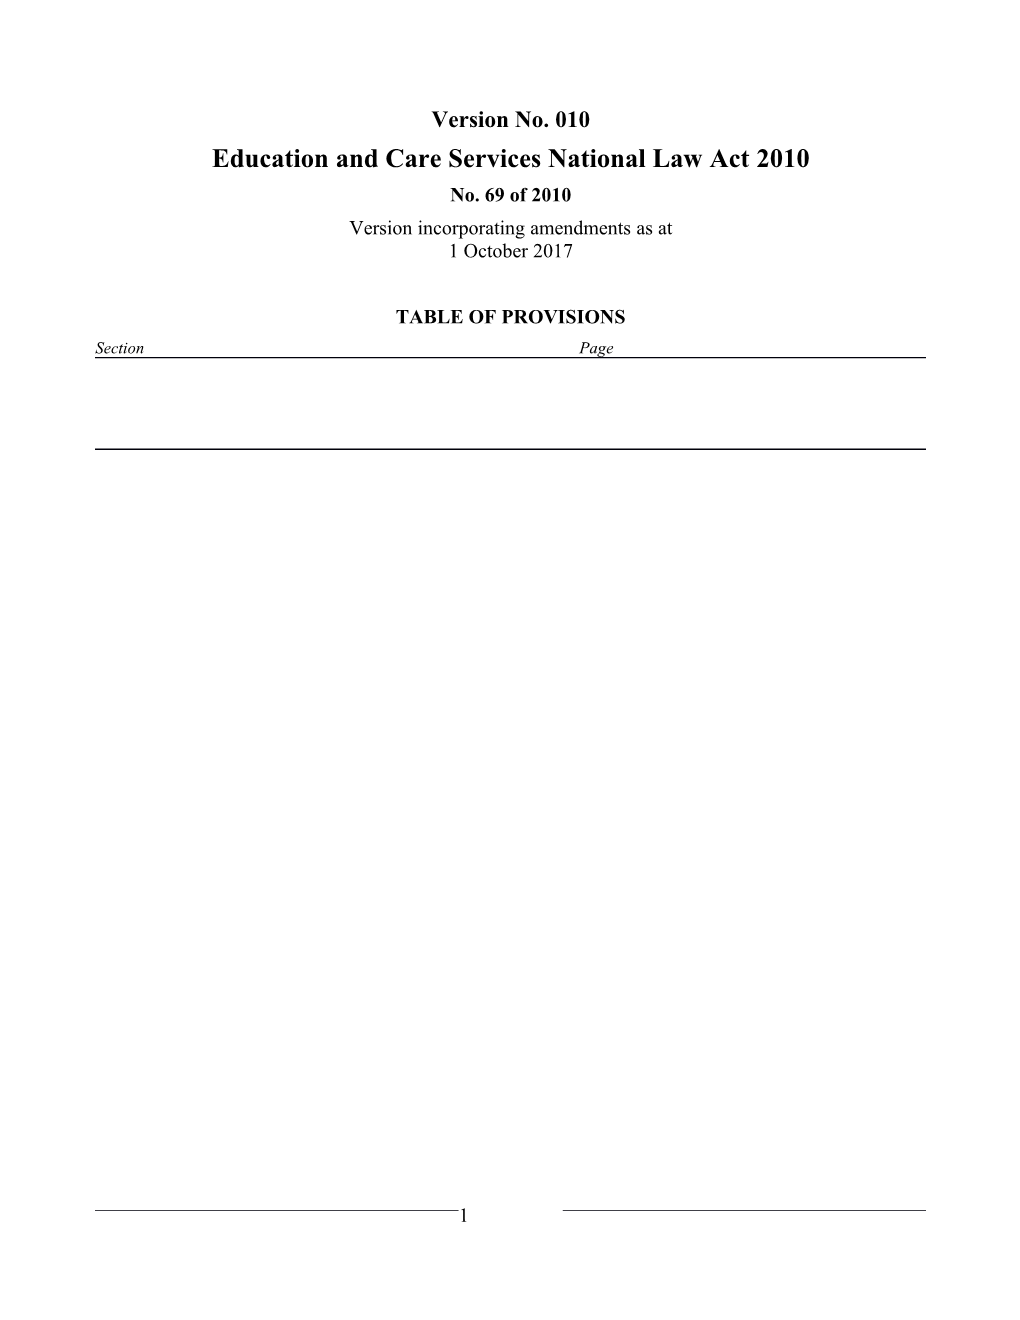 Education and Care Services National Law Act 2010